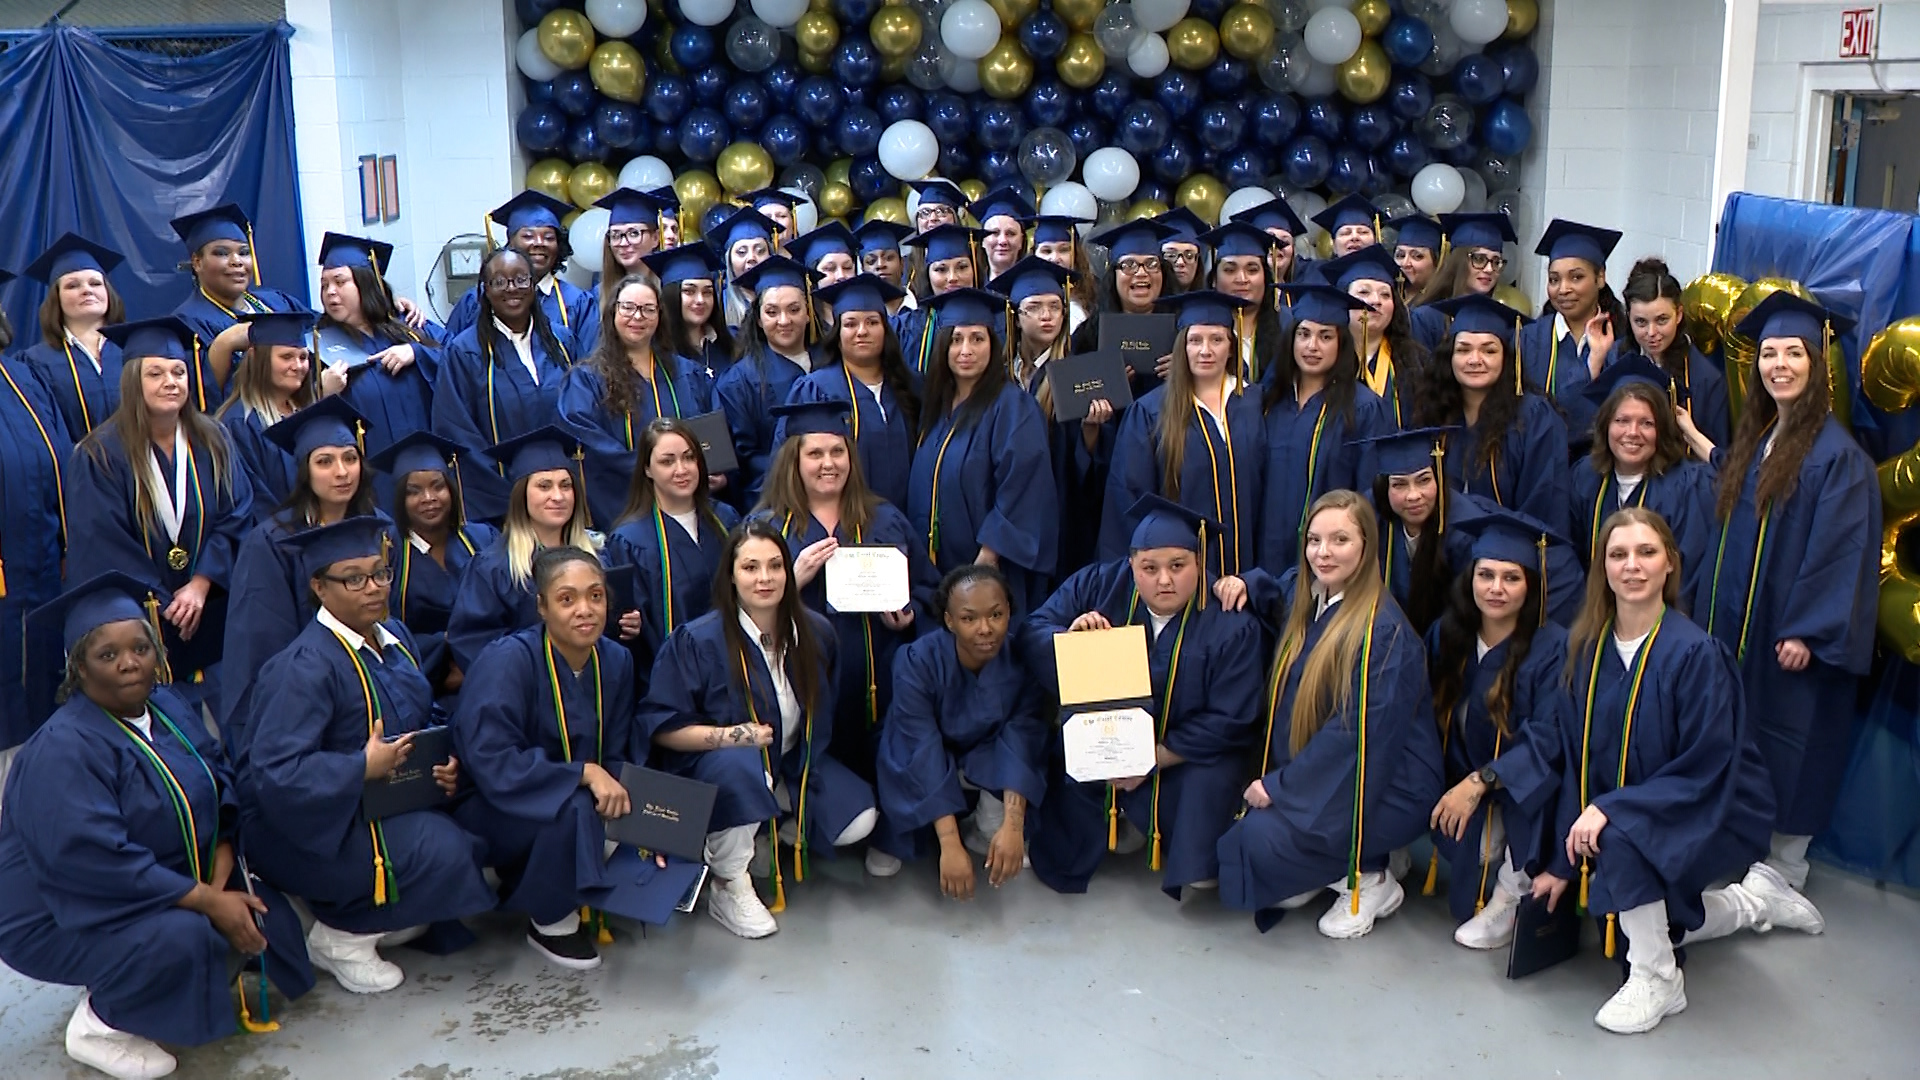 While serving their sentences, 70 women at the Lockhart Correctional Facility received their high school diplomas through the Goodwill Excel Center.